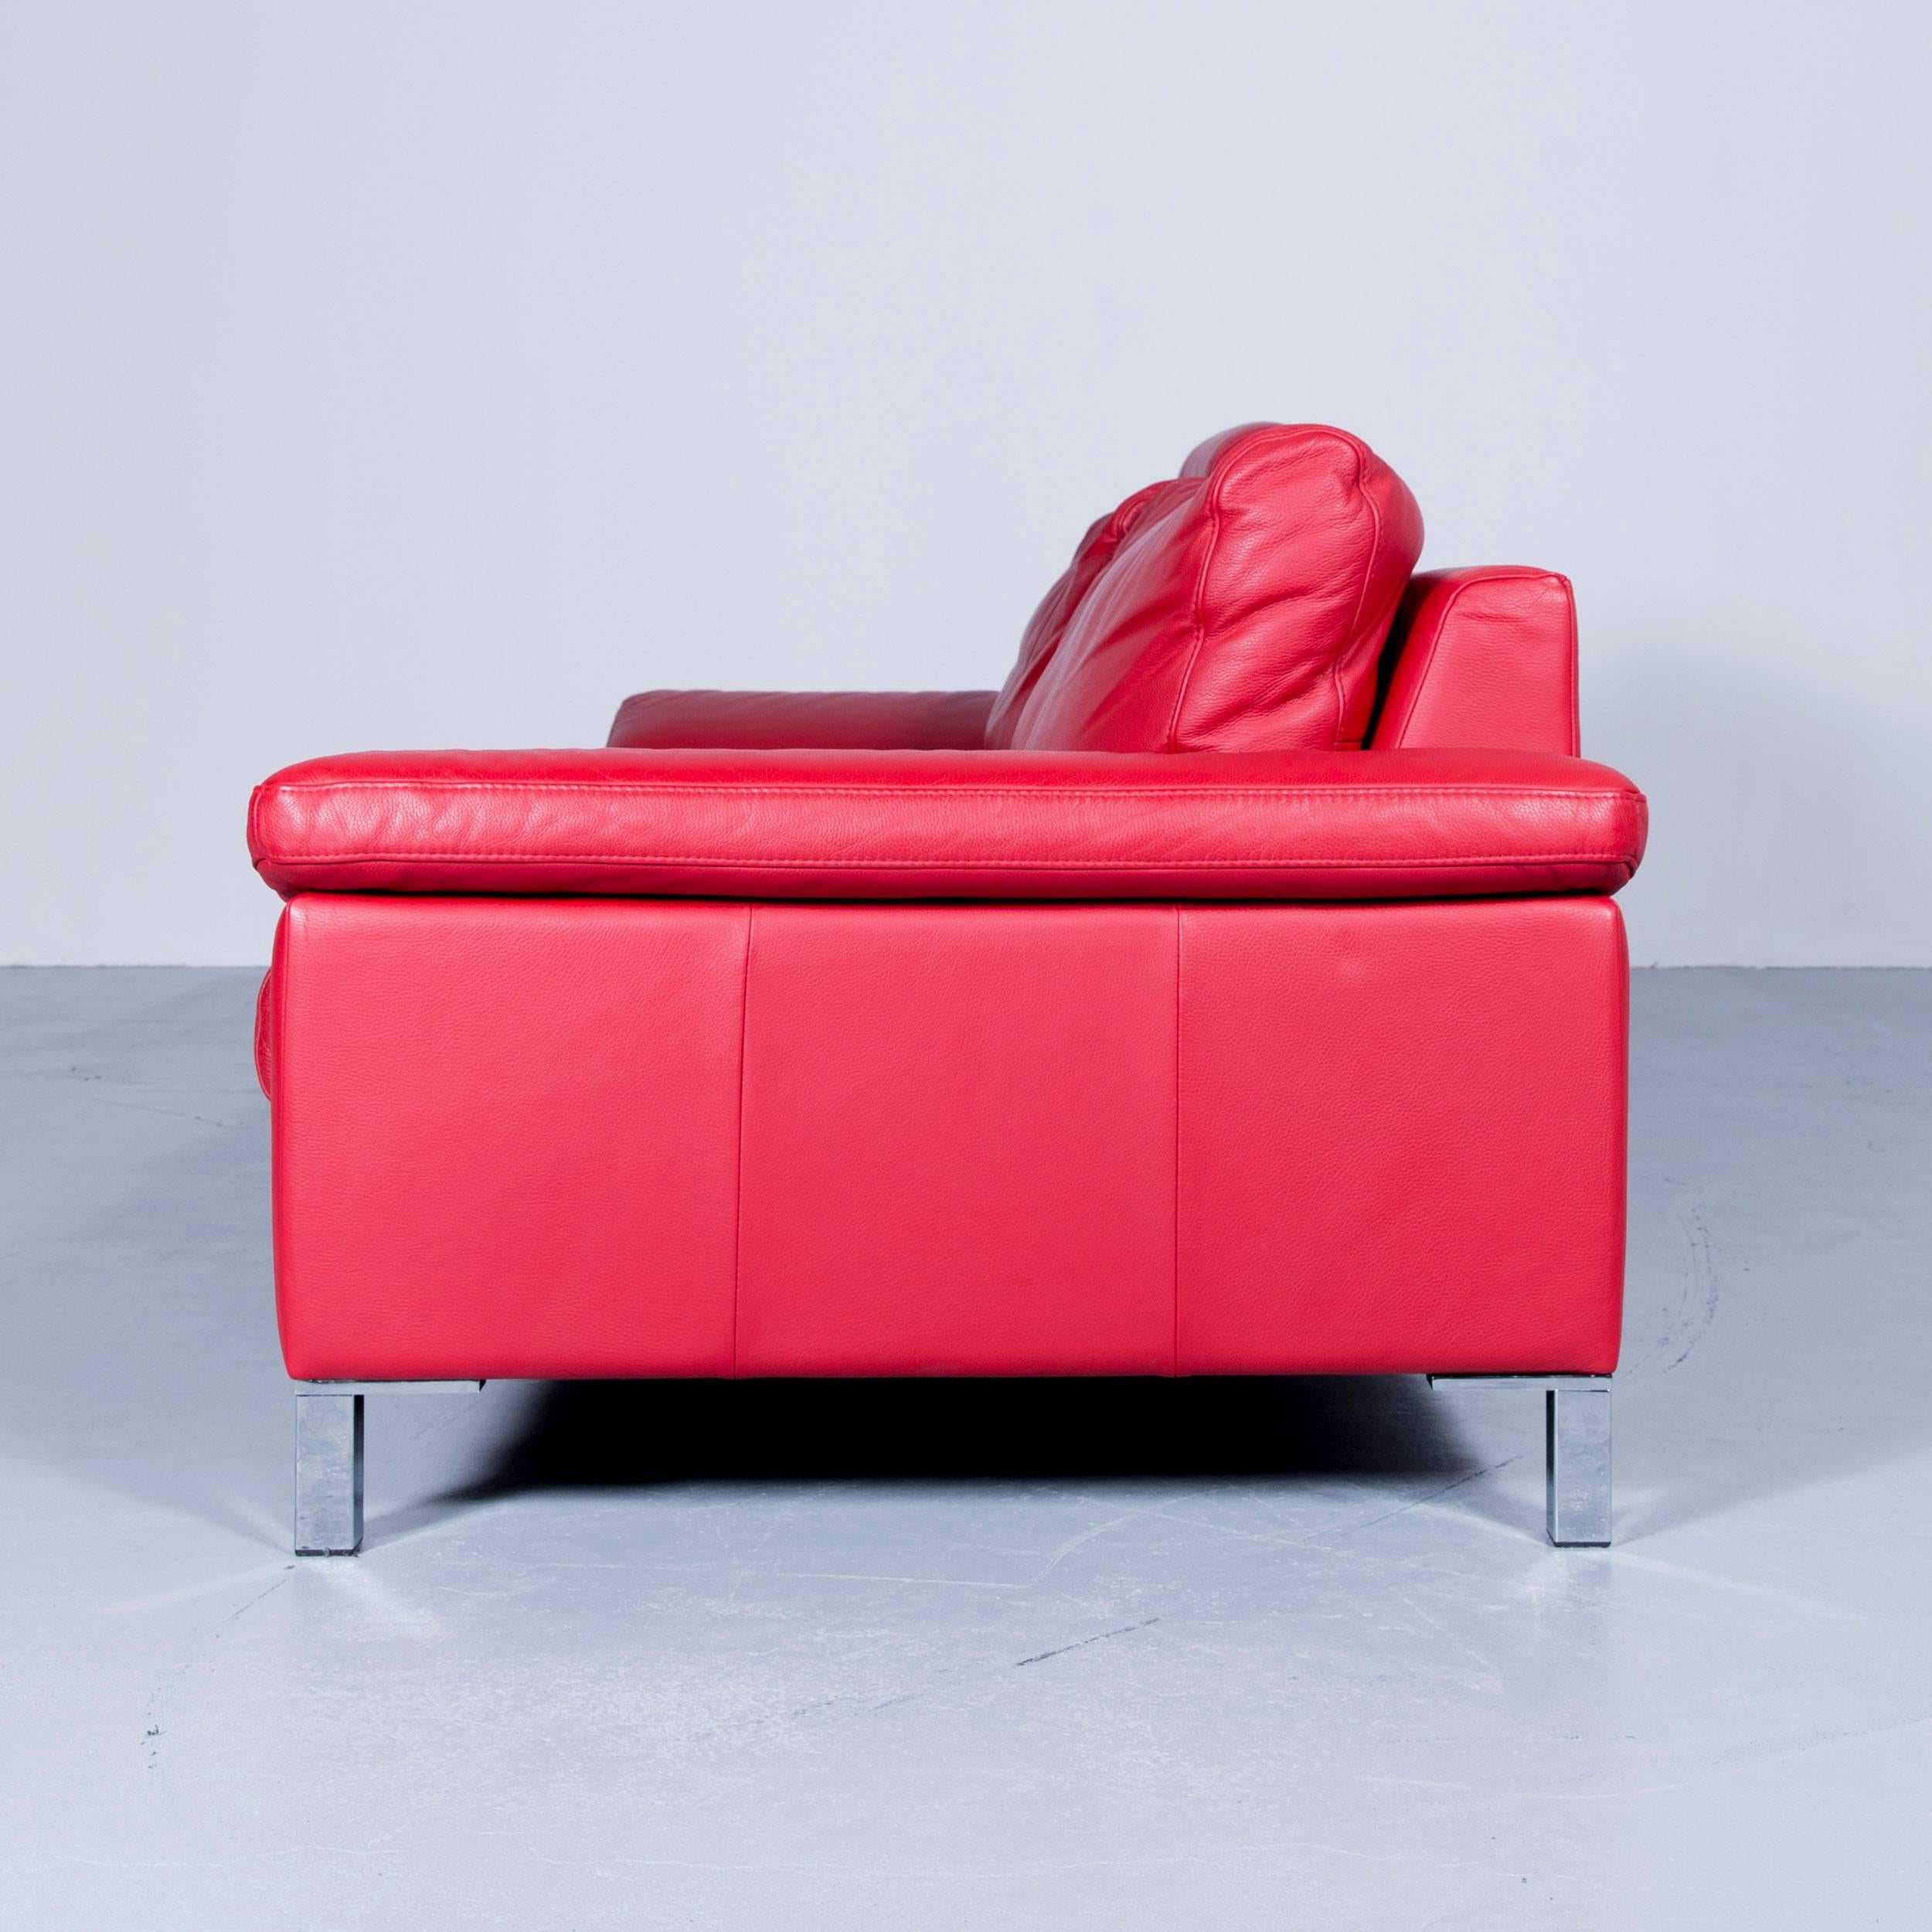 Designer Sofa Red Three-Seat Leather Modern Couch Head Rest 3